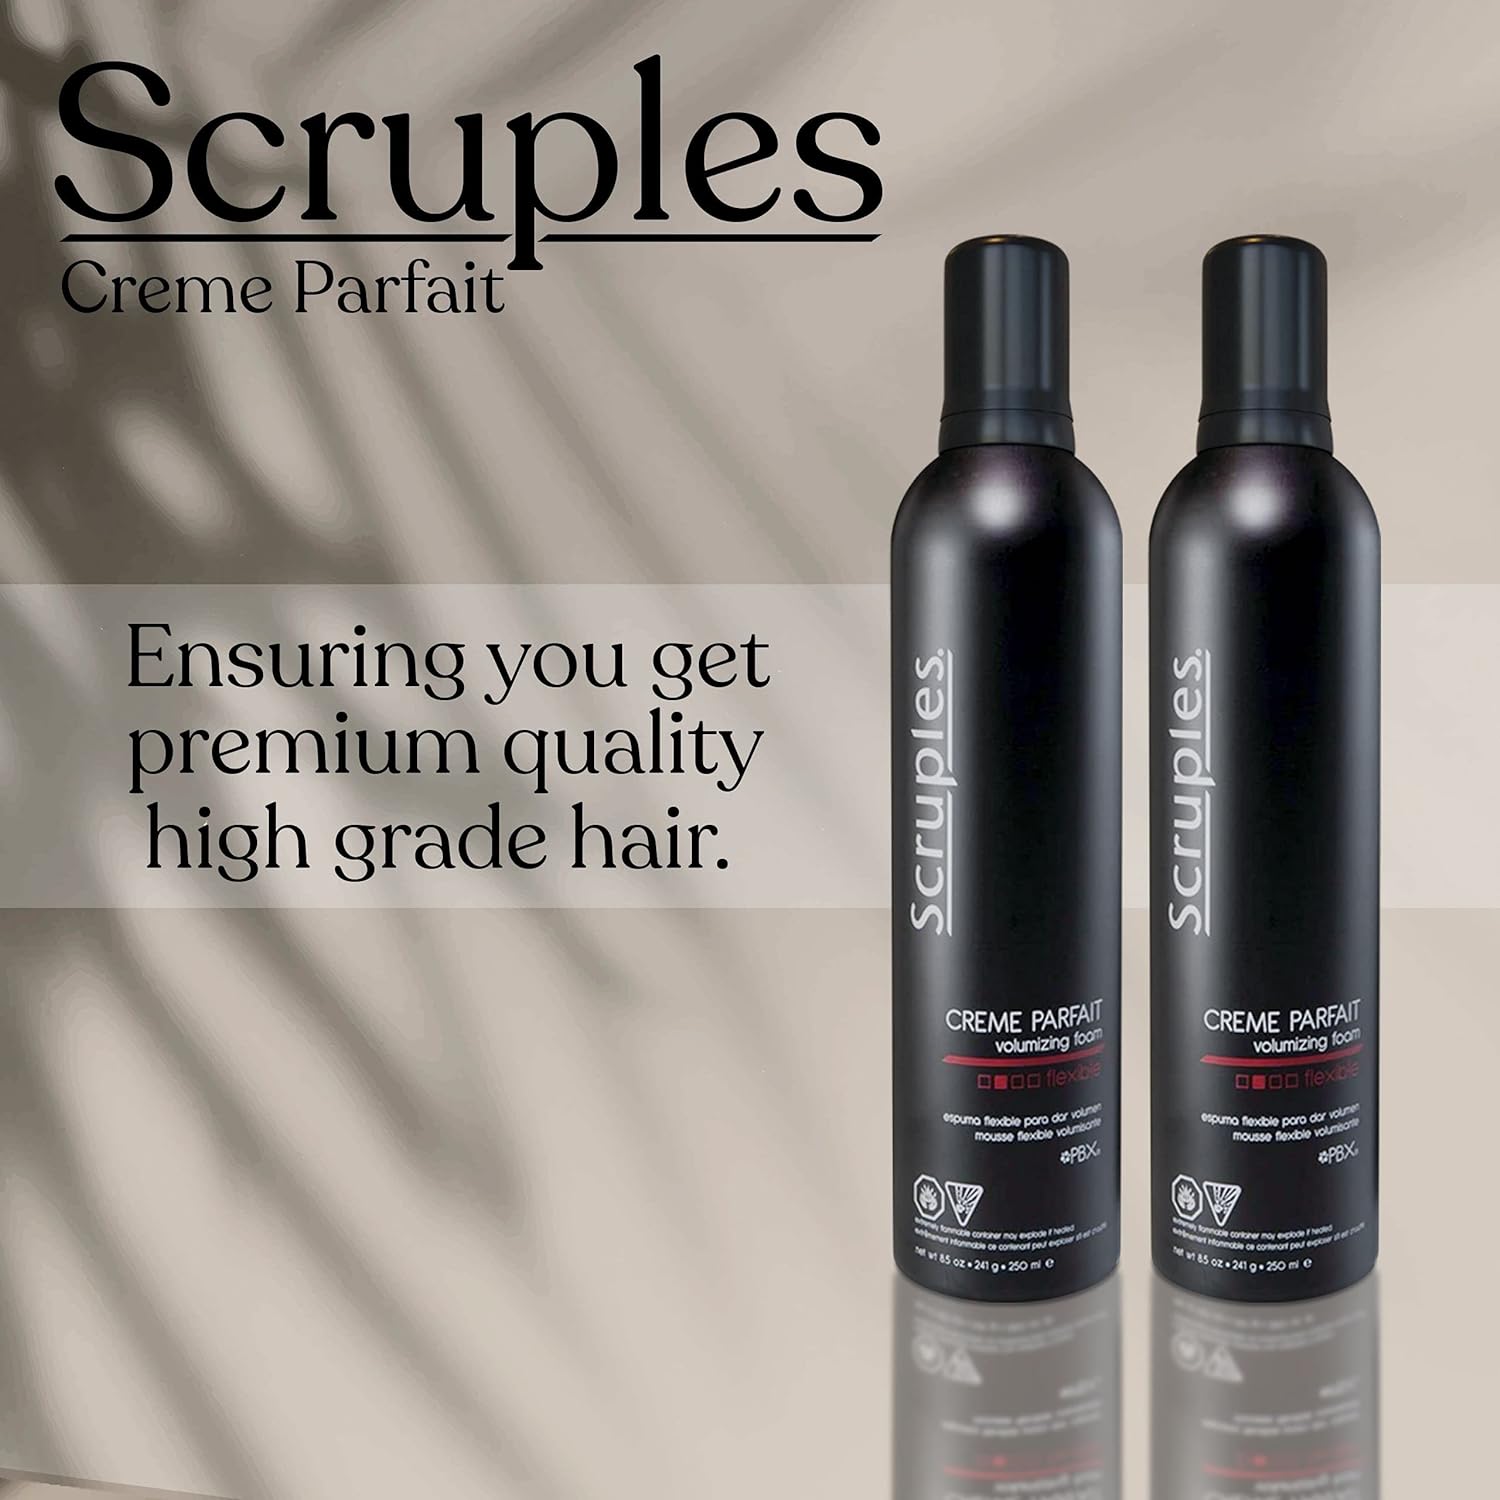 Scruples Creme Parfait Volumizing Foam - Rich & Weightless Styling Foam for Ultimate Smoothing Control, Hydration & Frizz-Free Hold - Alcohol-Free Hair Mousse for All Hair Types (Pack of 2) : Beauty & Personal Care